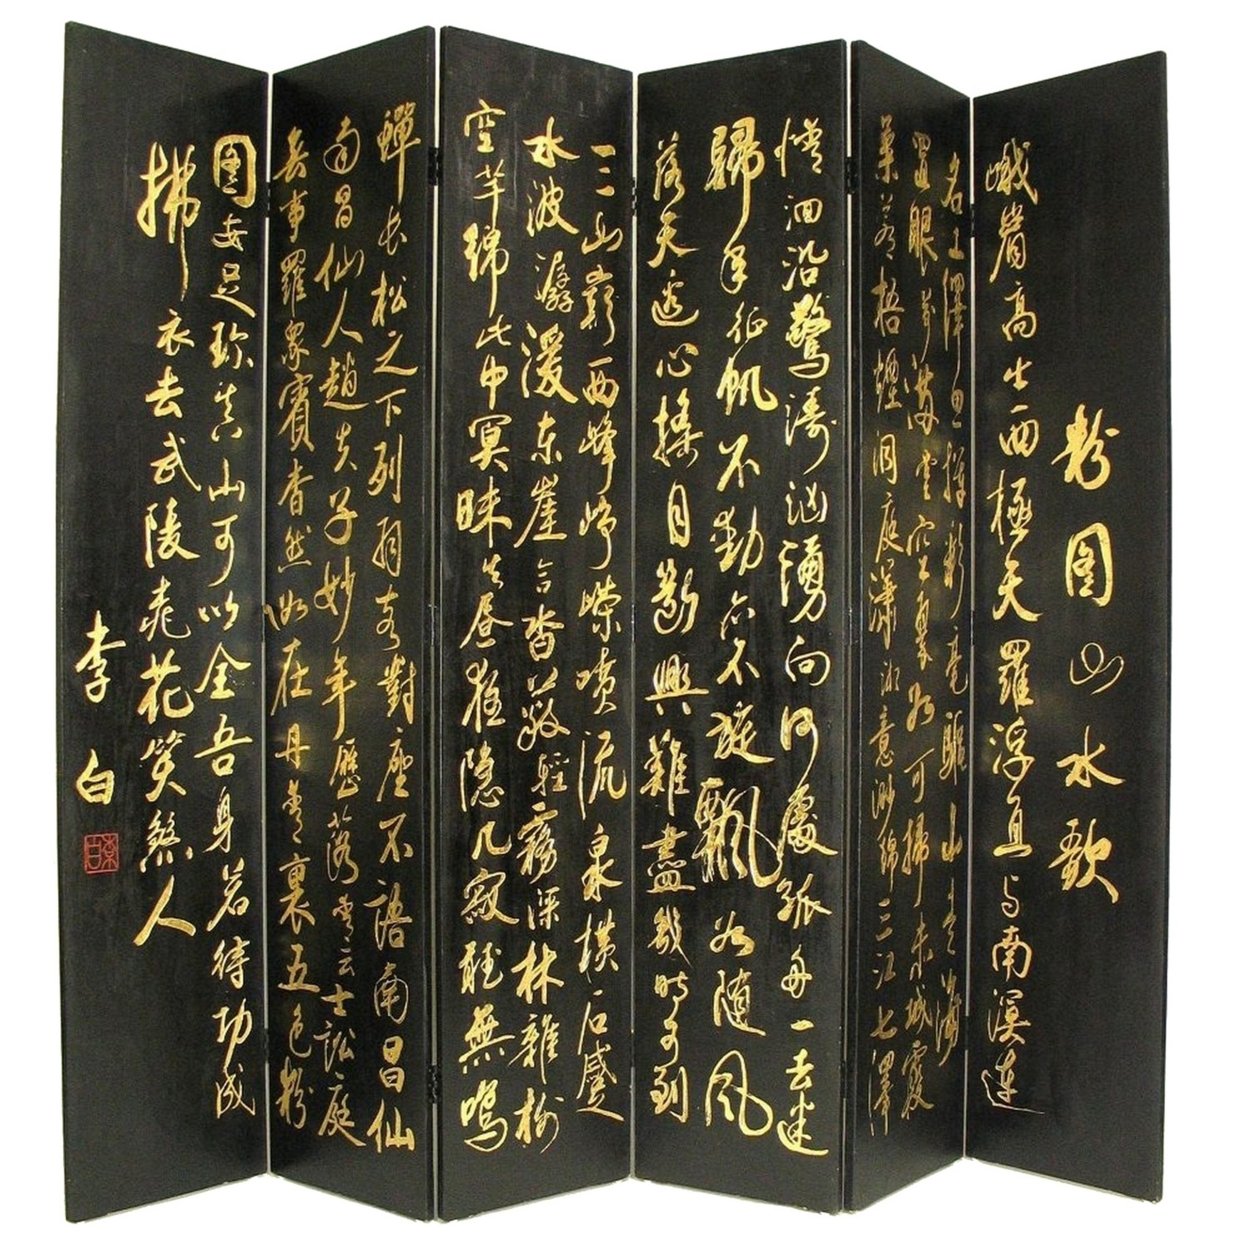 6 Panel Screen With Hand Painted Chinese Writing, Black And Gold- Saltoro Sherpi